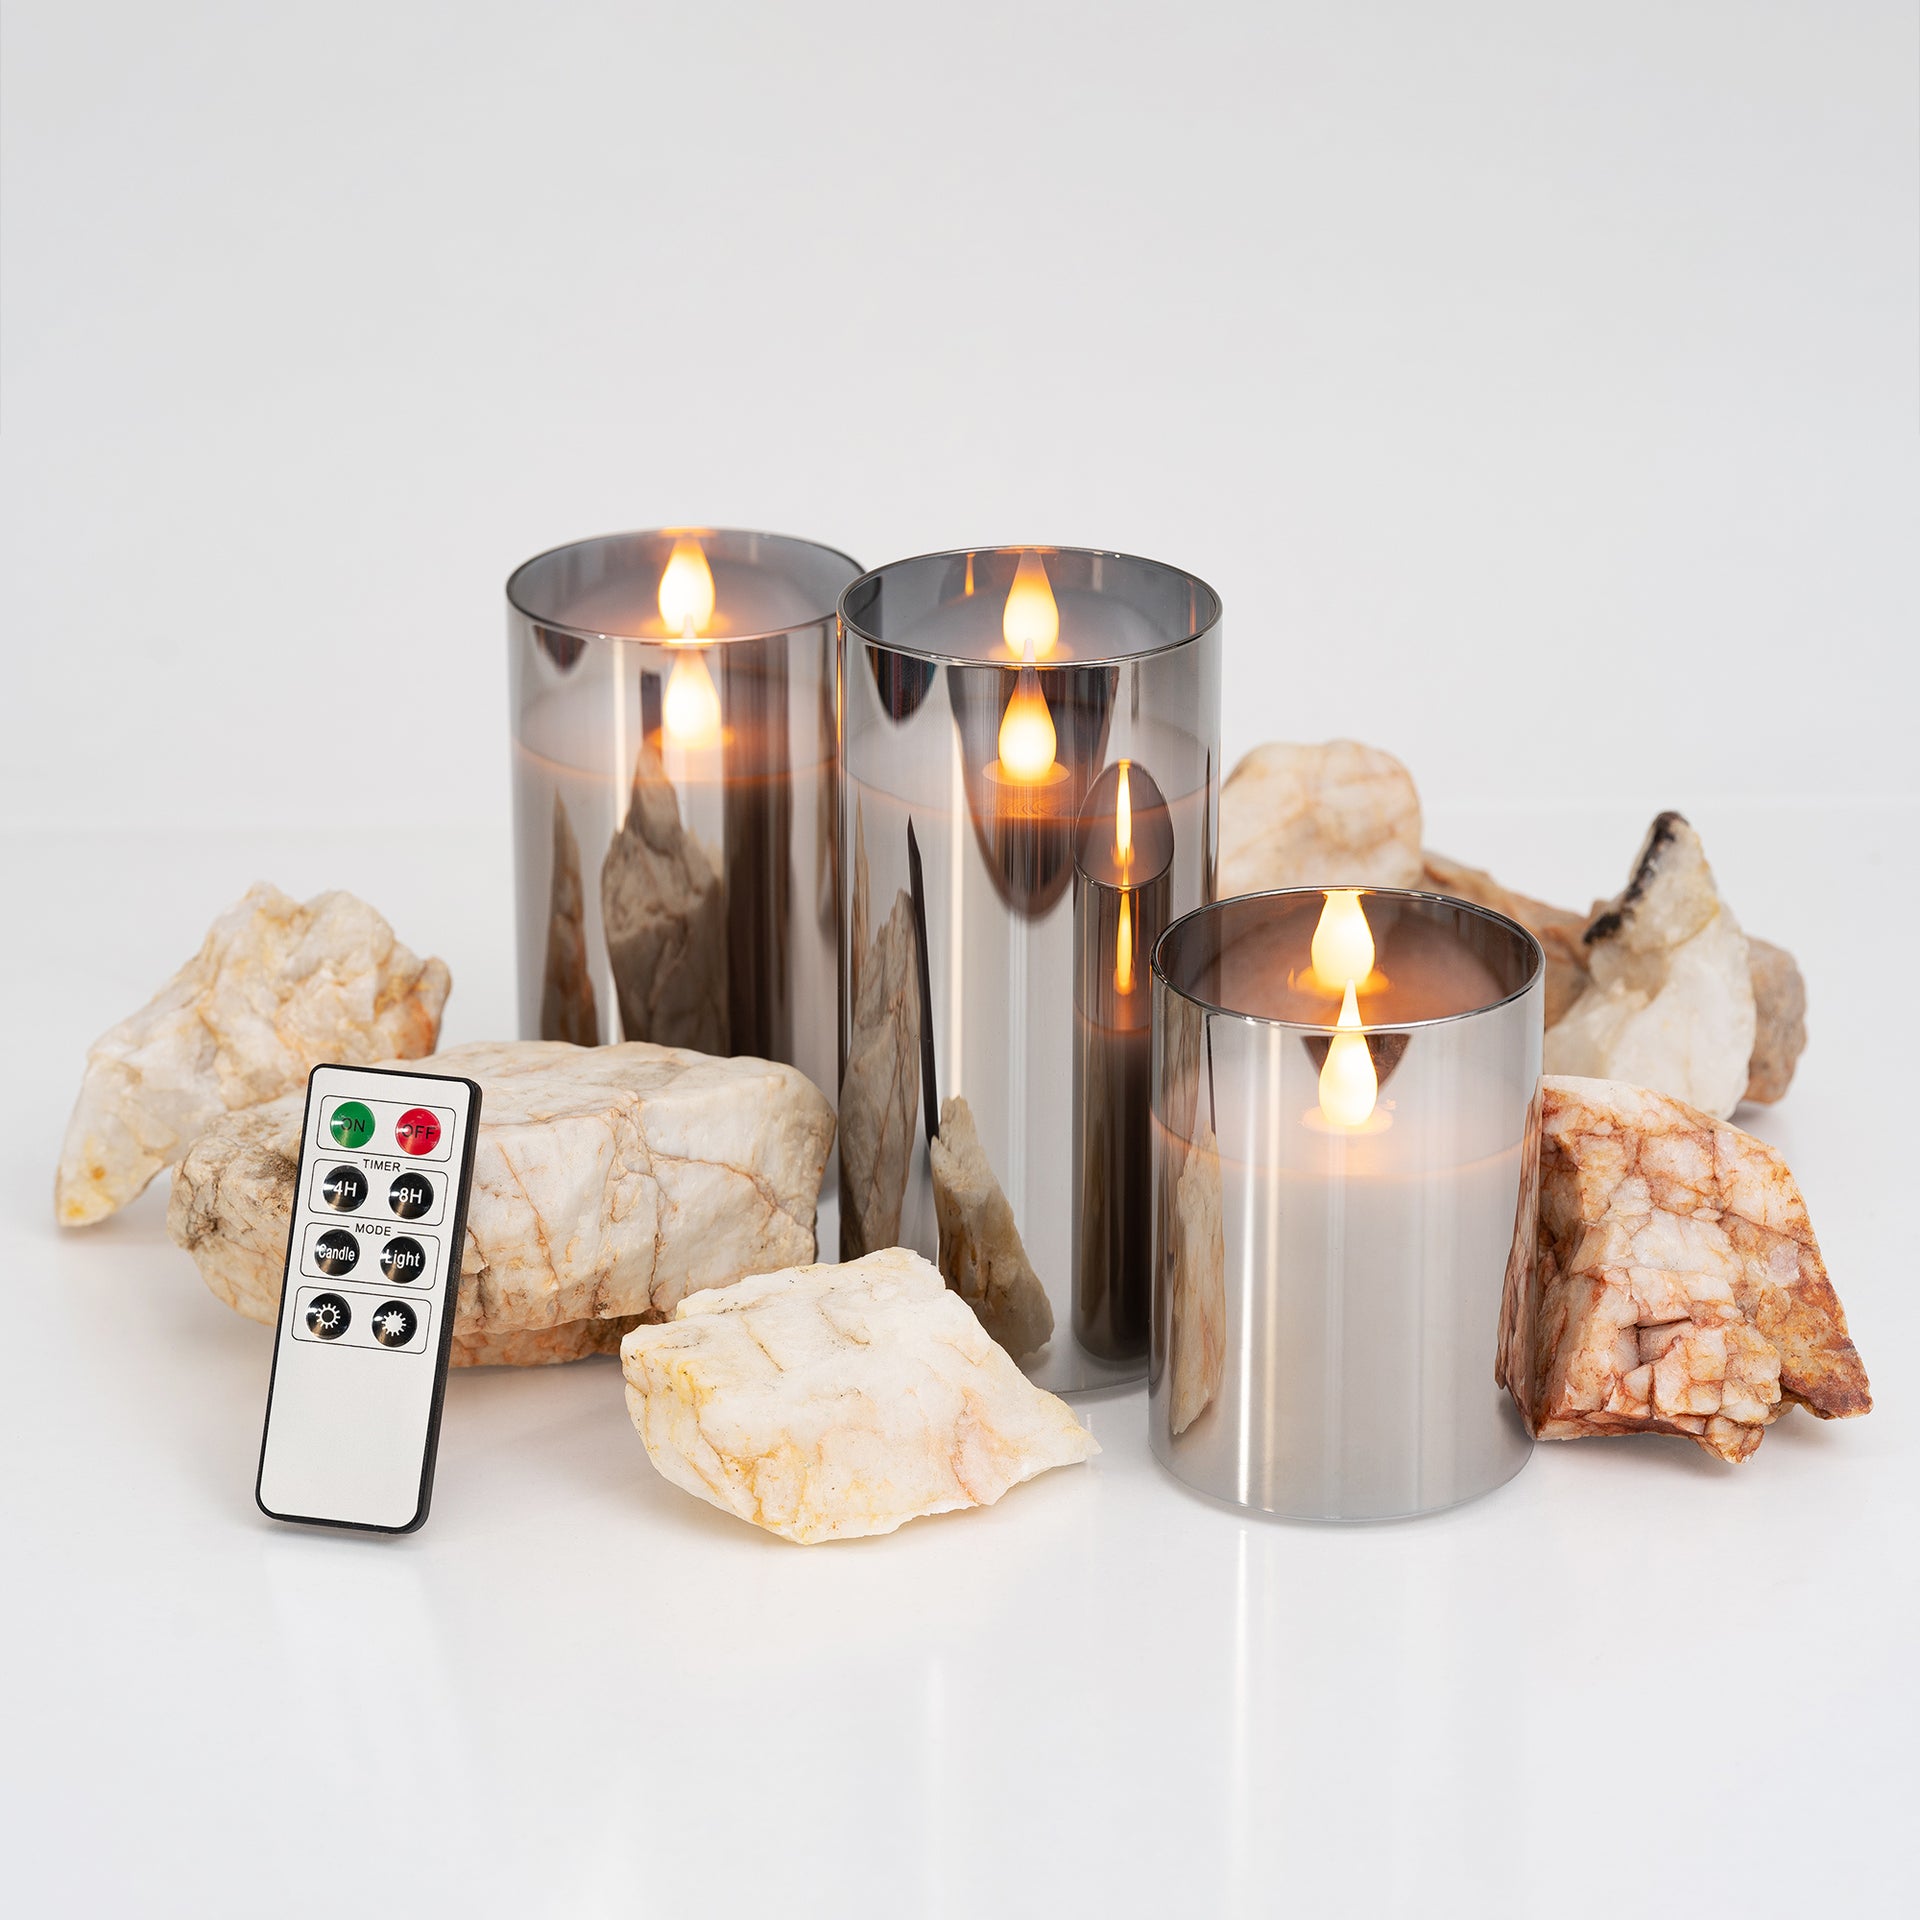 LED METALLIC MIRRORED GLASS FLICKERING FLAMELESS CANDLES - SET OF 3 (4" 5" 6") WITH REMOTE CONTROL - West Ivory LED Lighting 